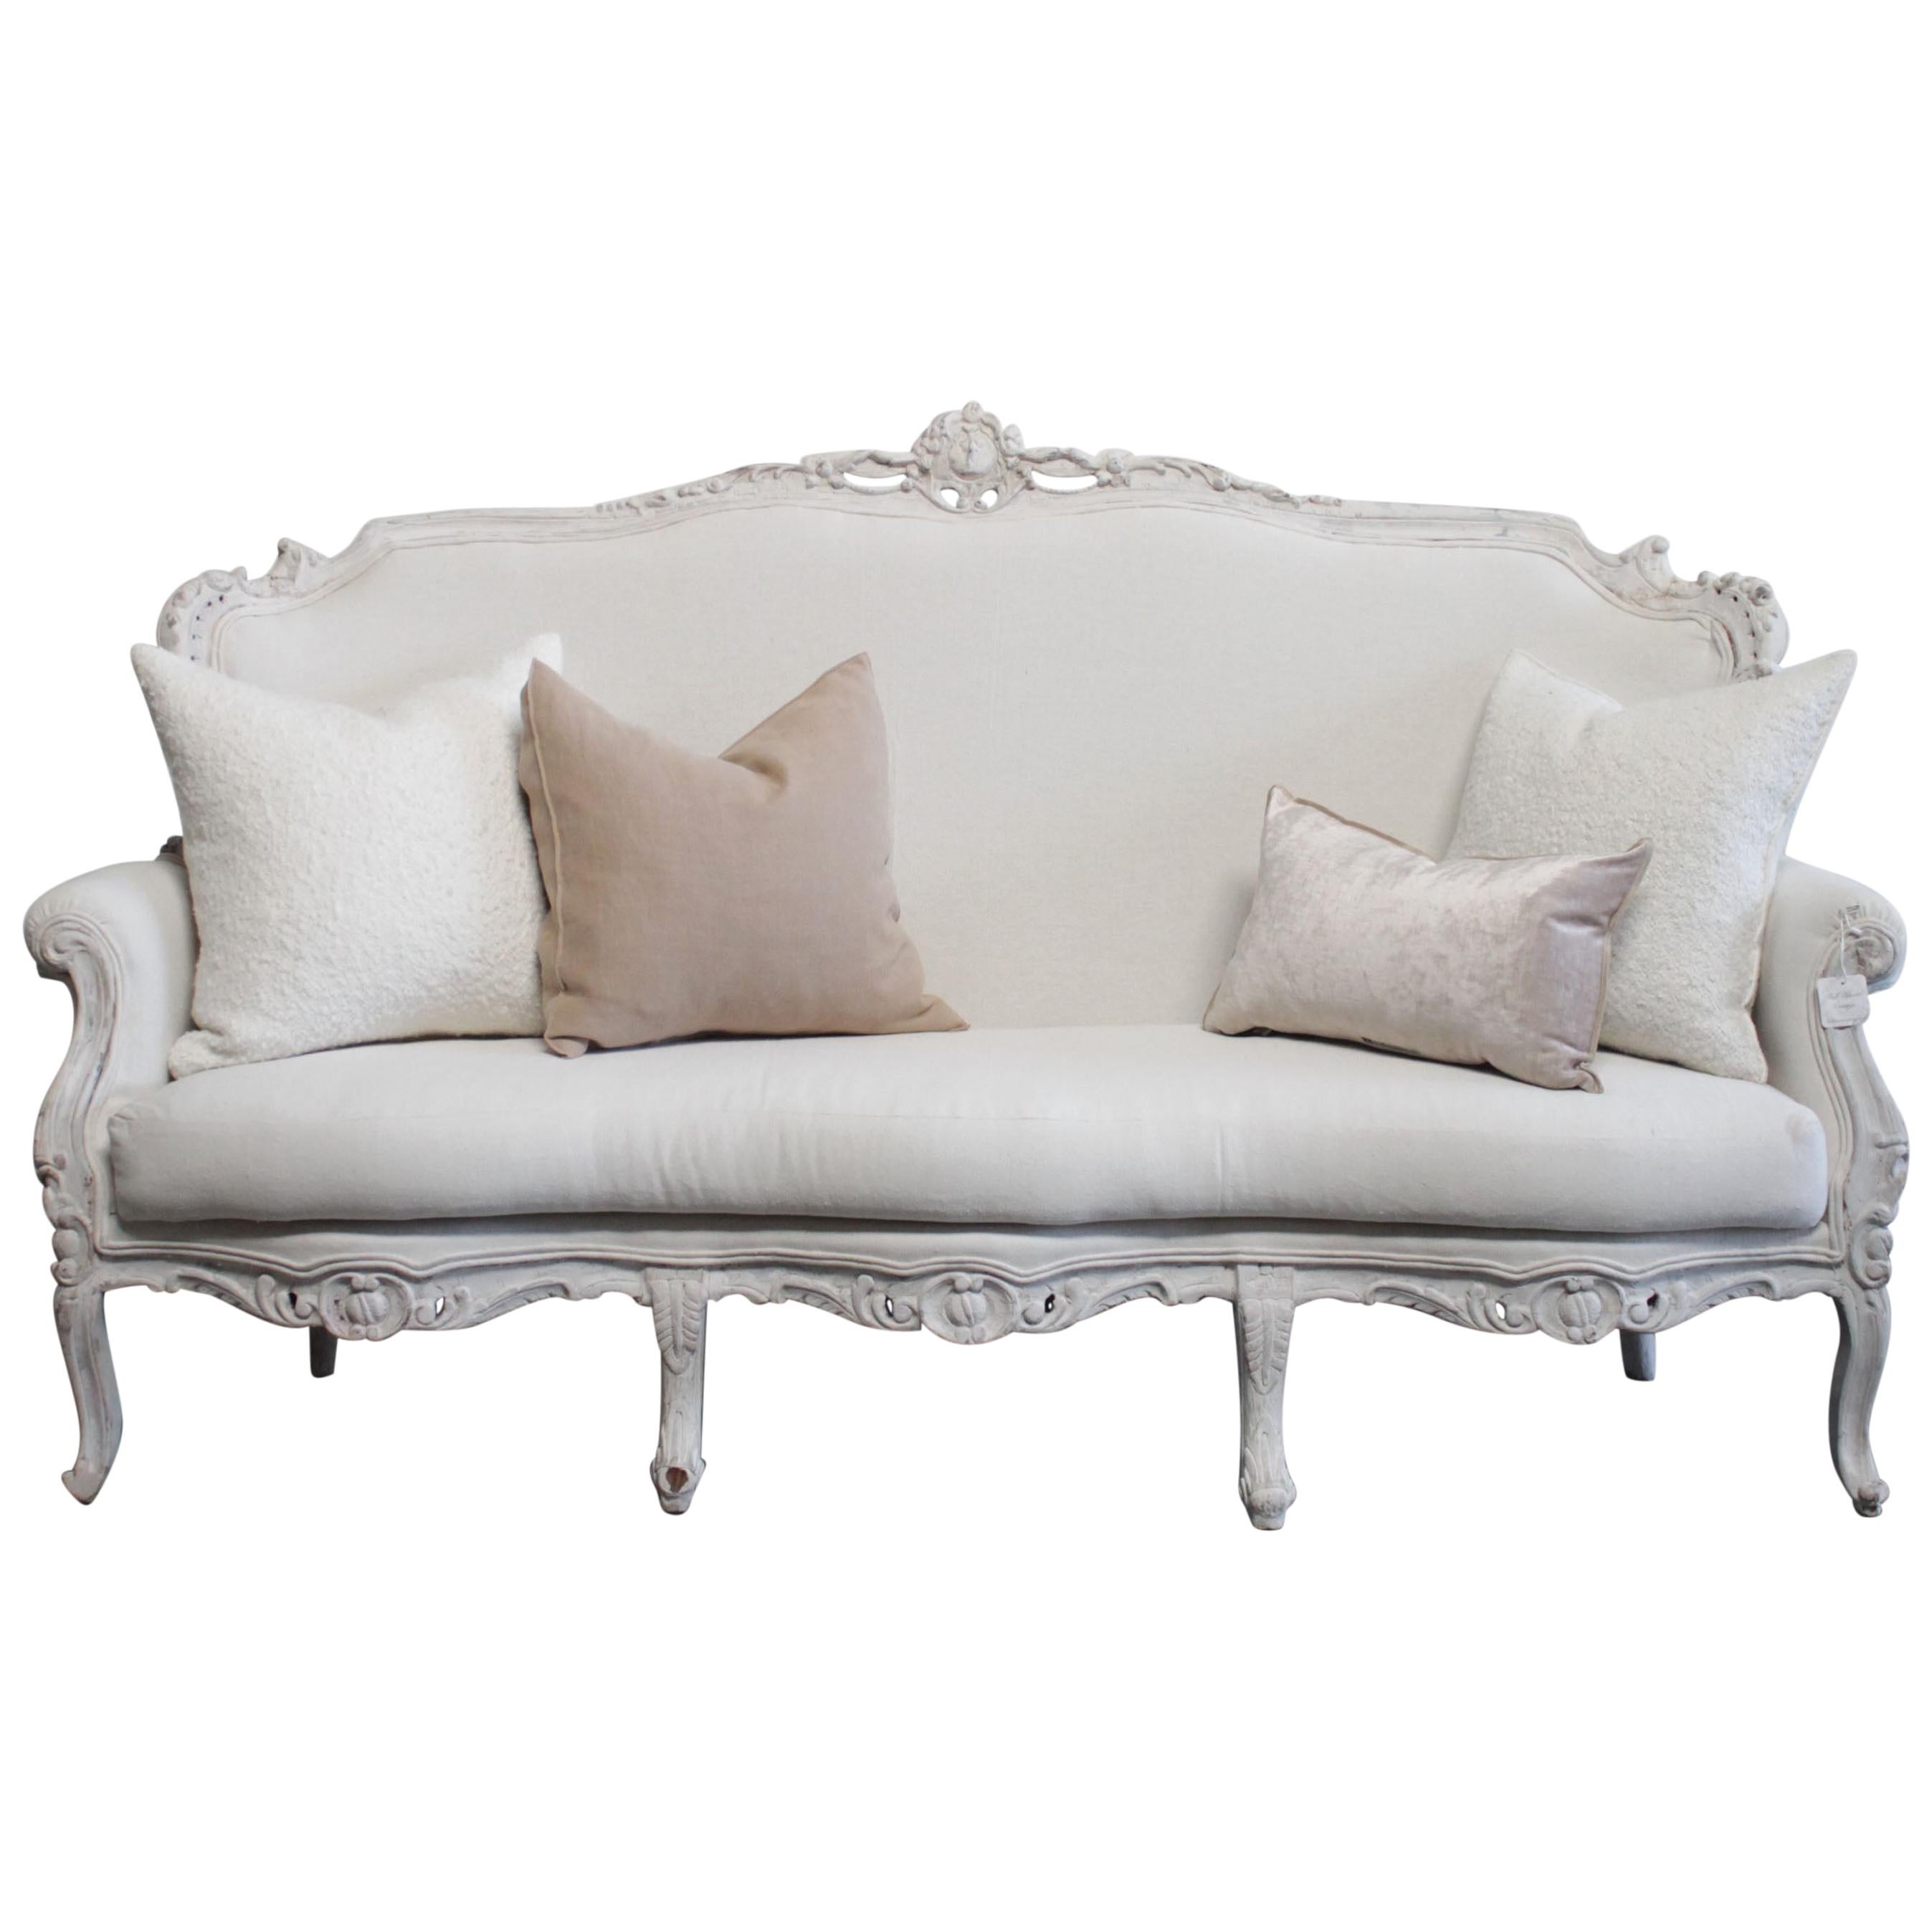 Vintage French Style Painted and Upholstered Sofa